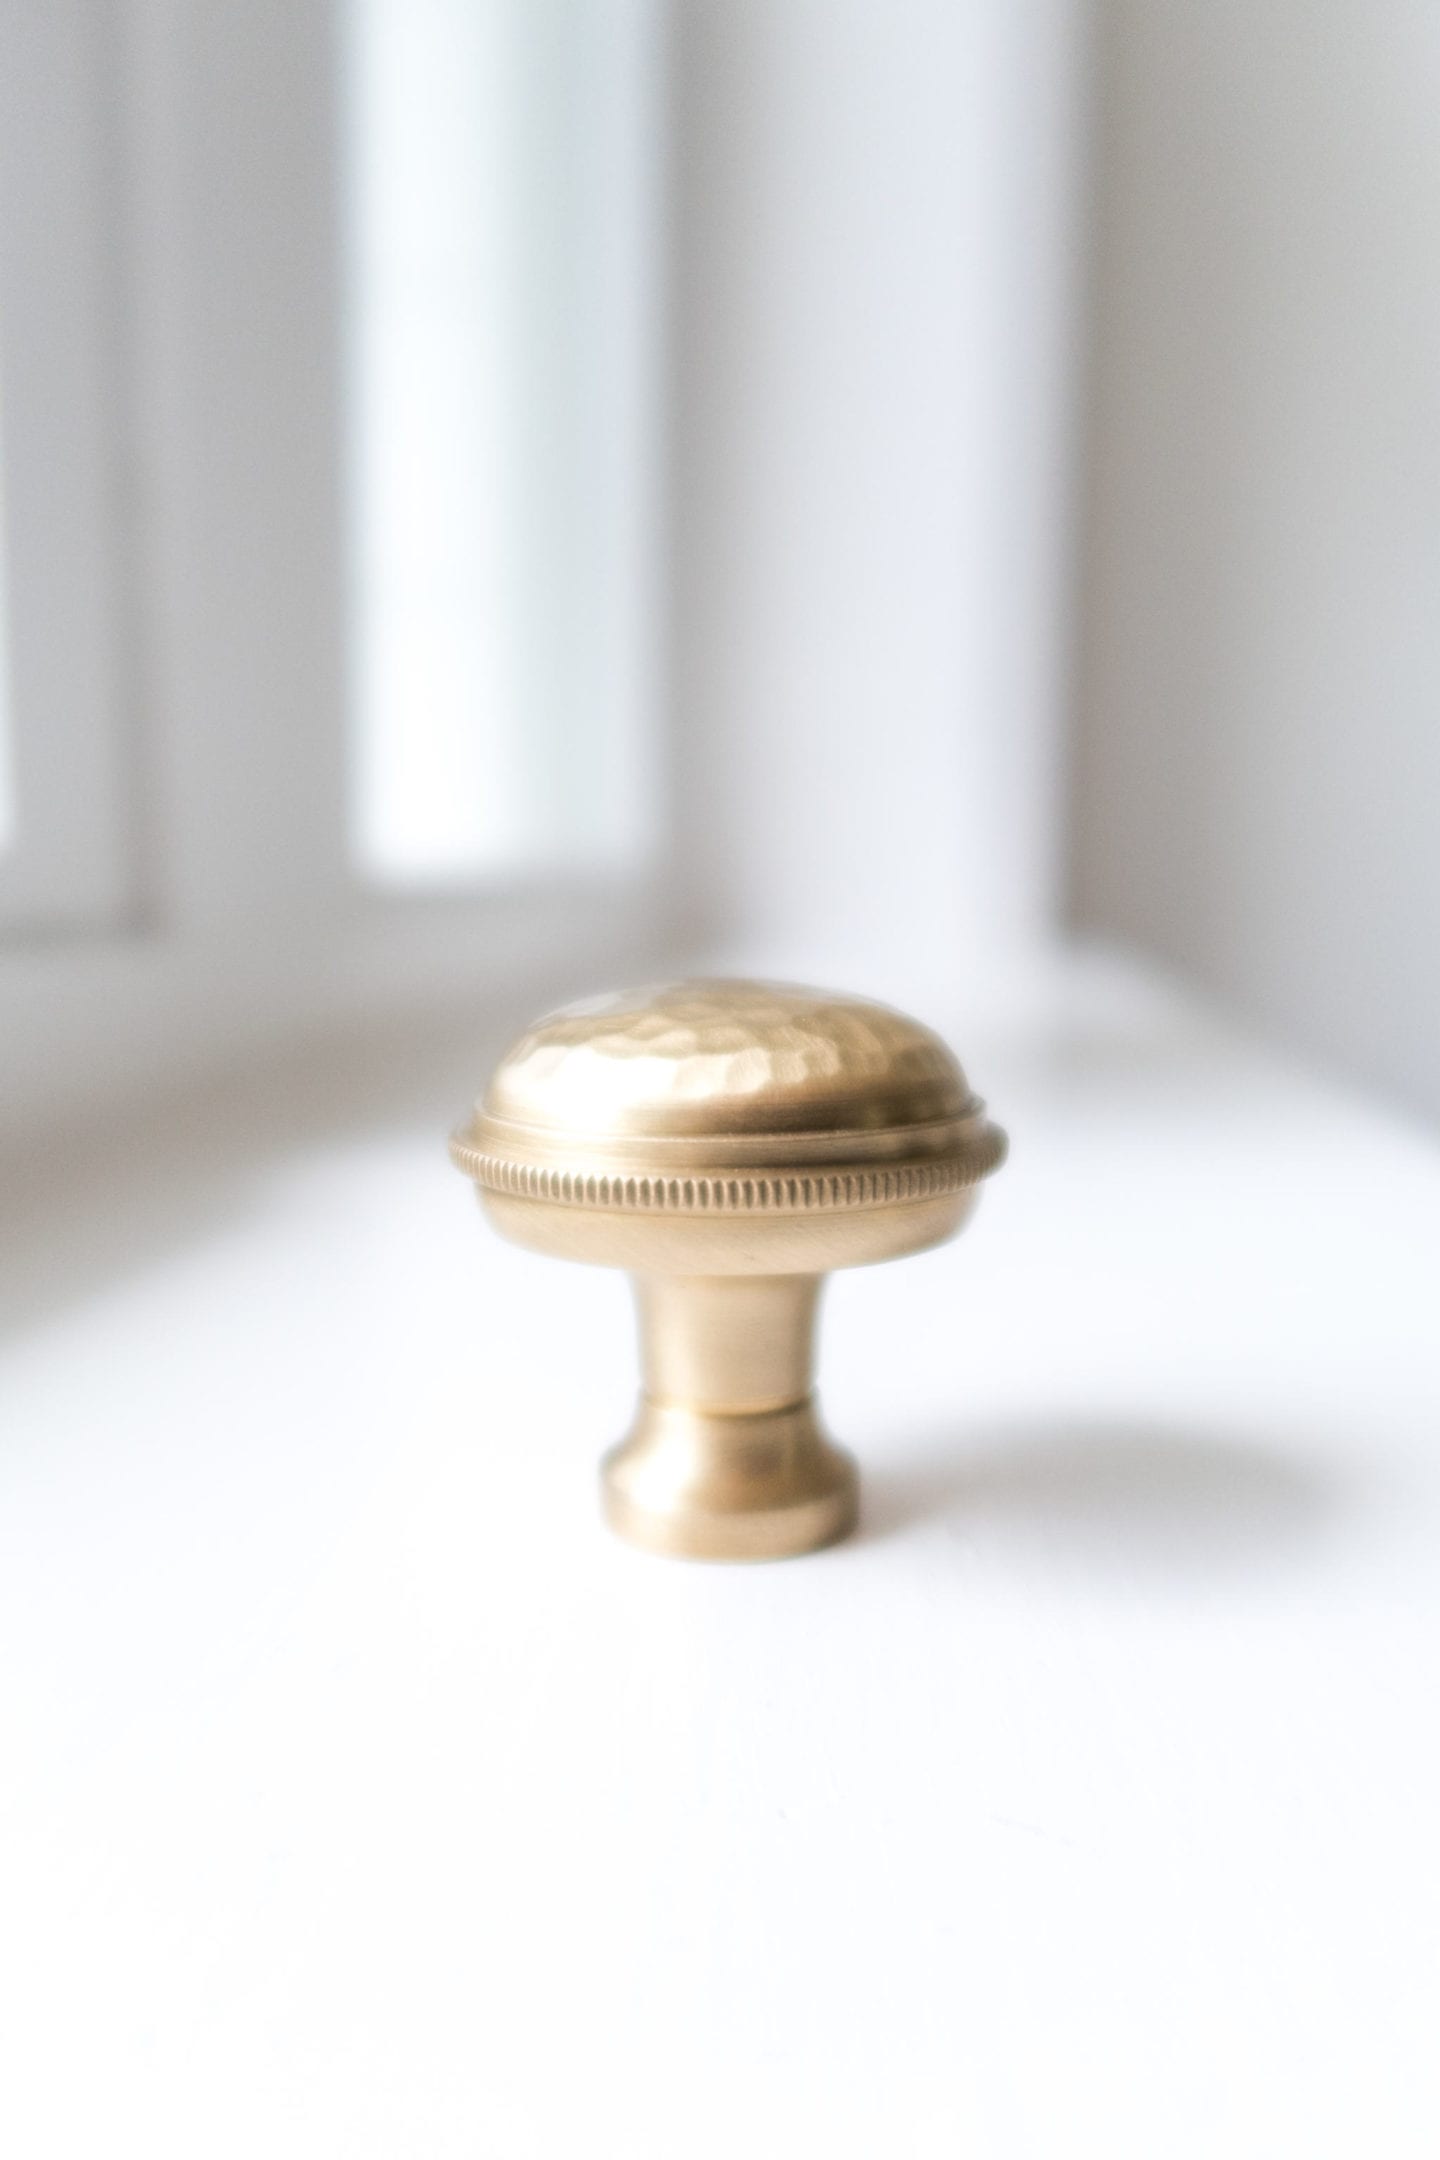 Cabinet Knob with hammered top for cabinet redesign.